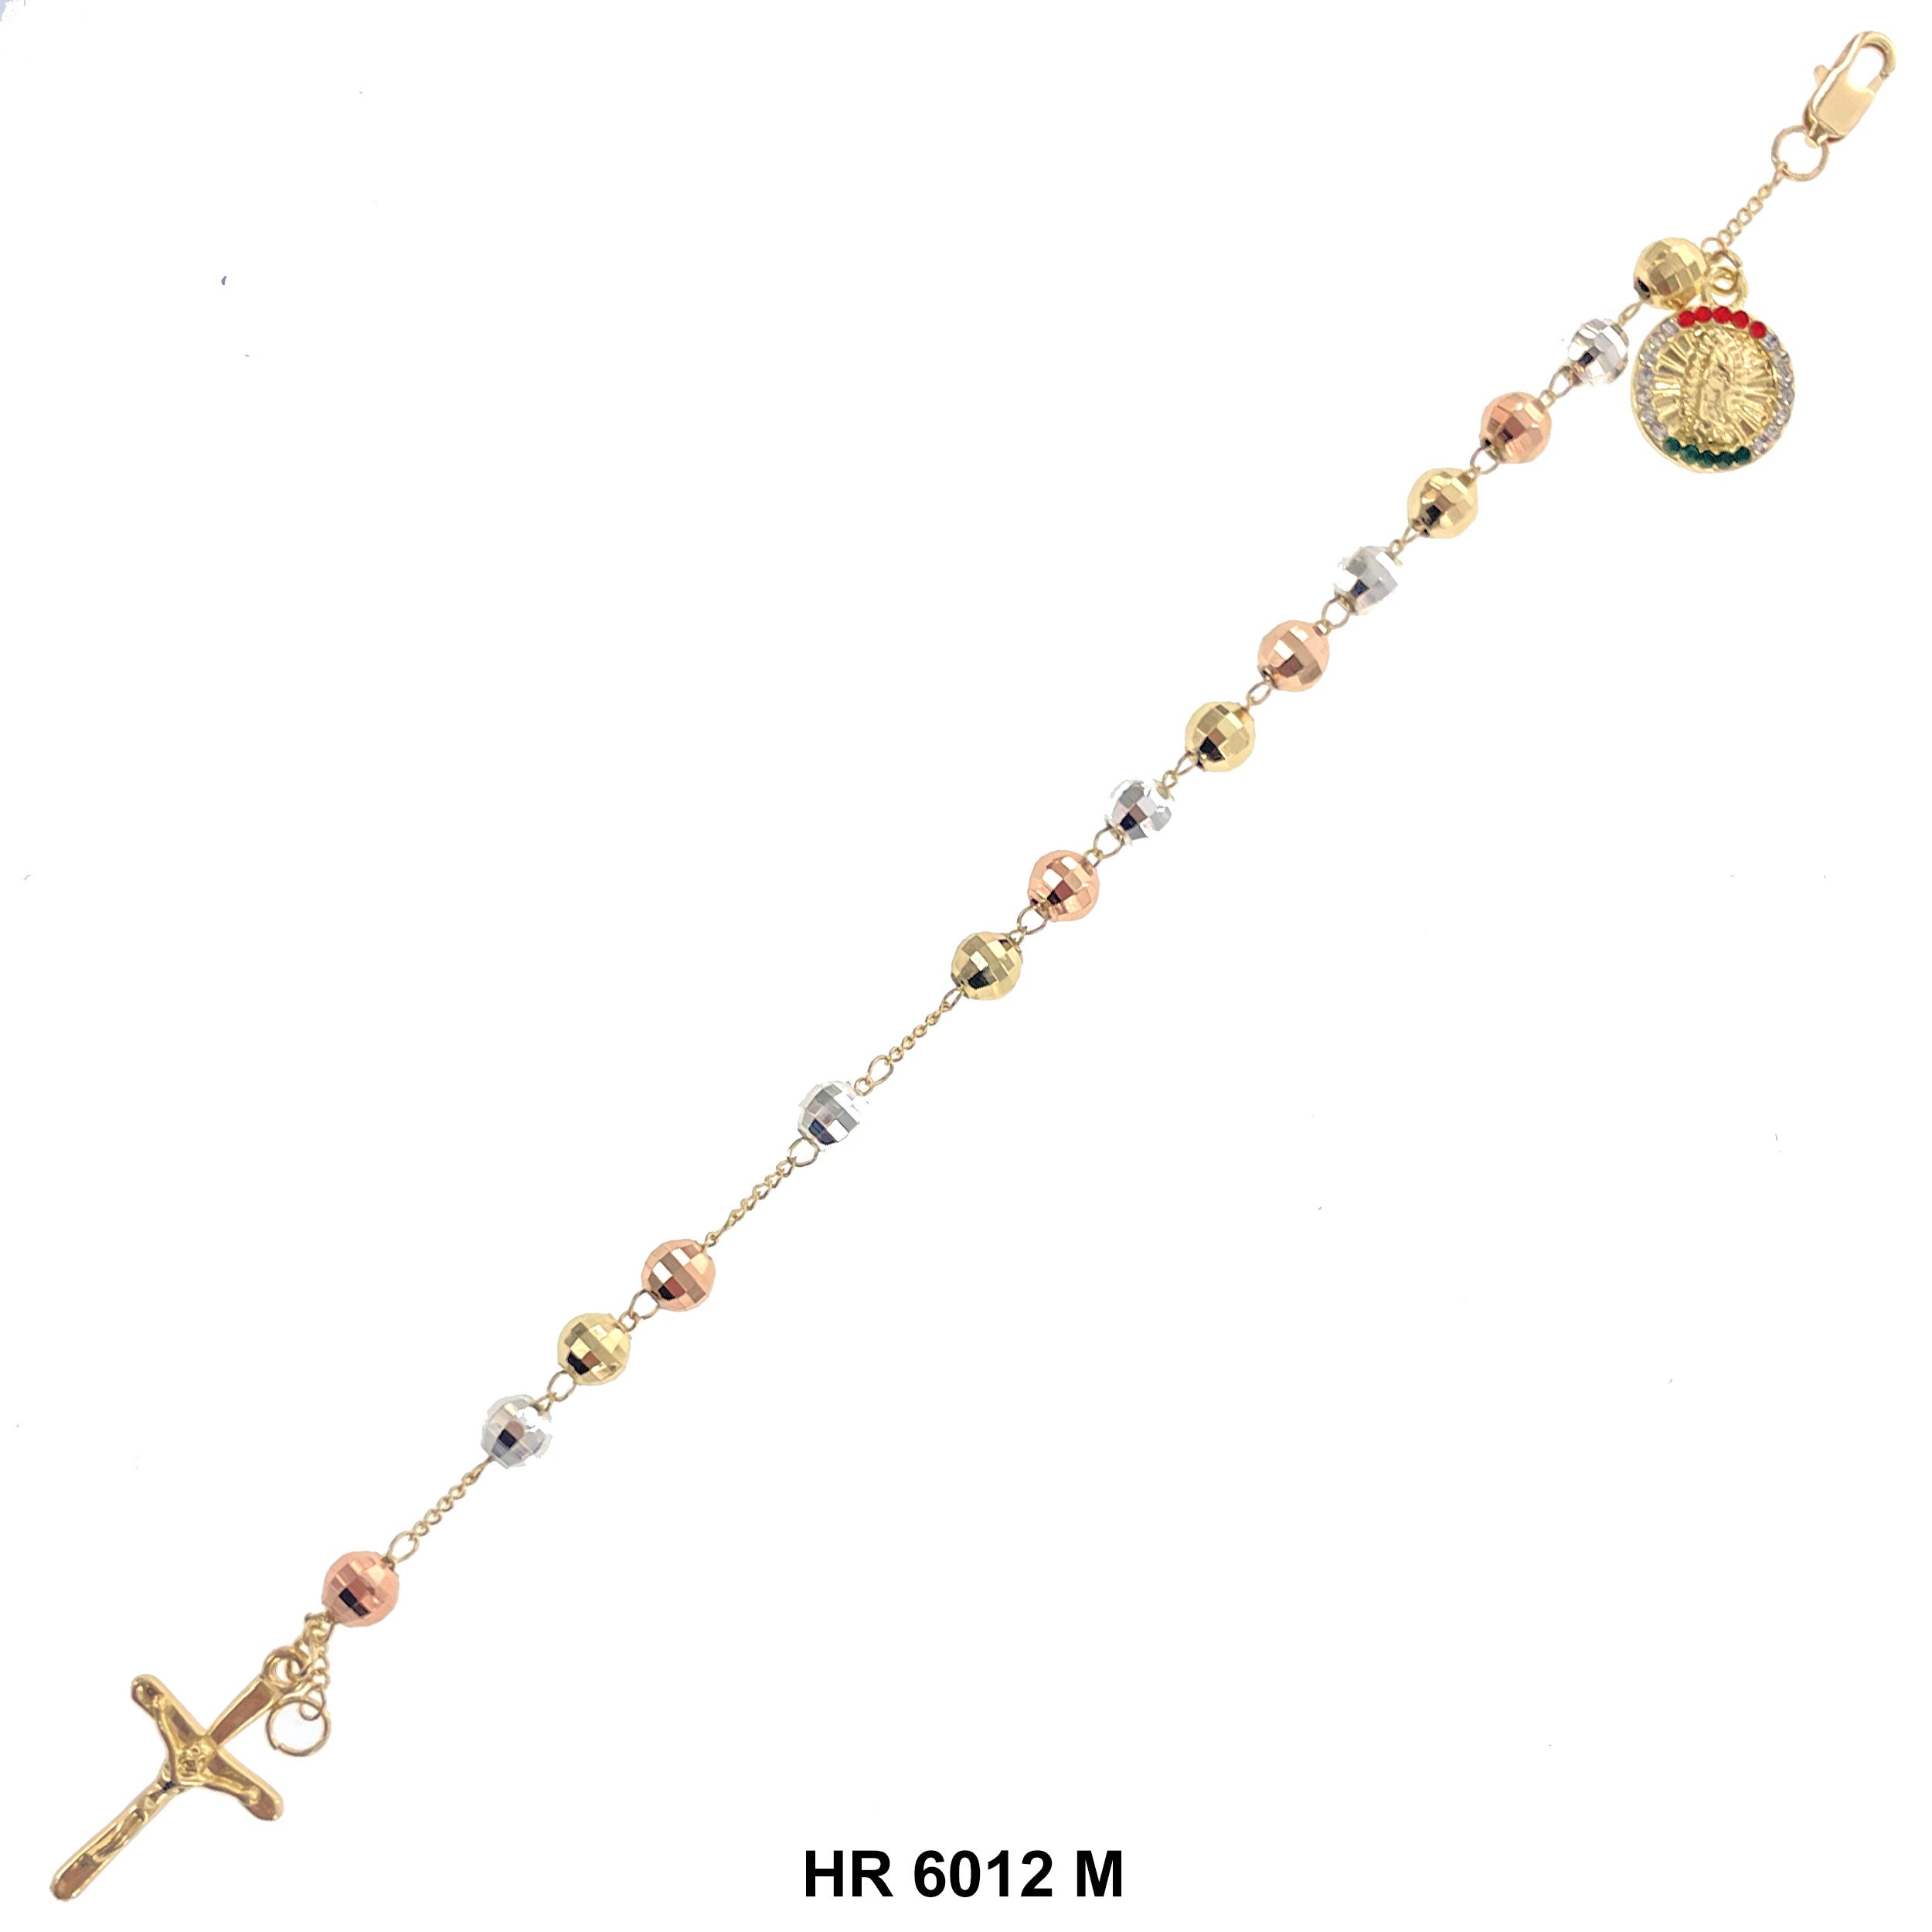 6 MM Guadalupe Hand Rosary HR 6012 M